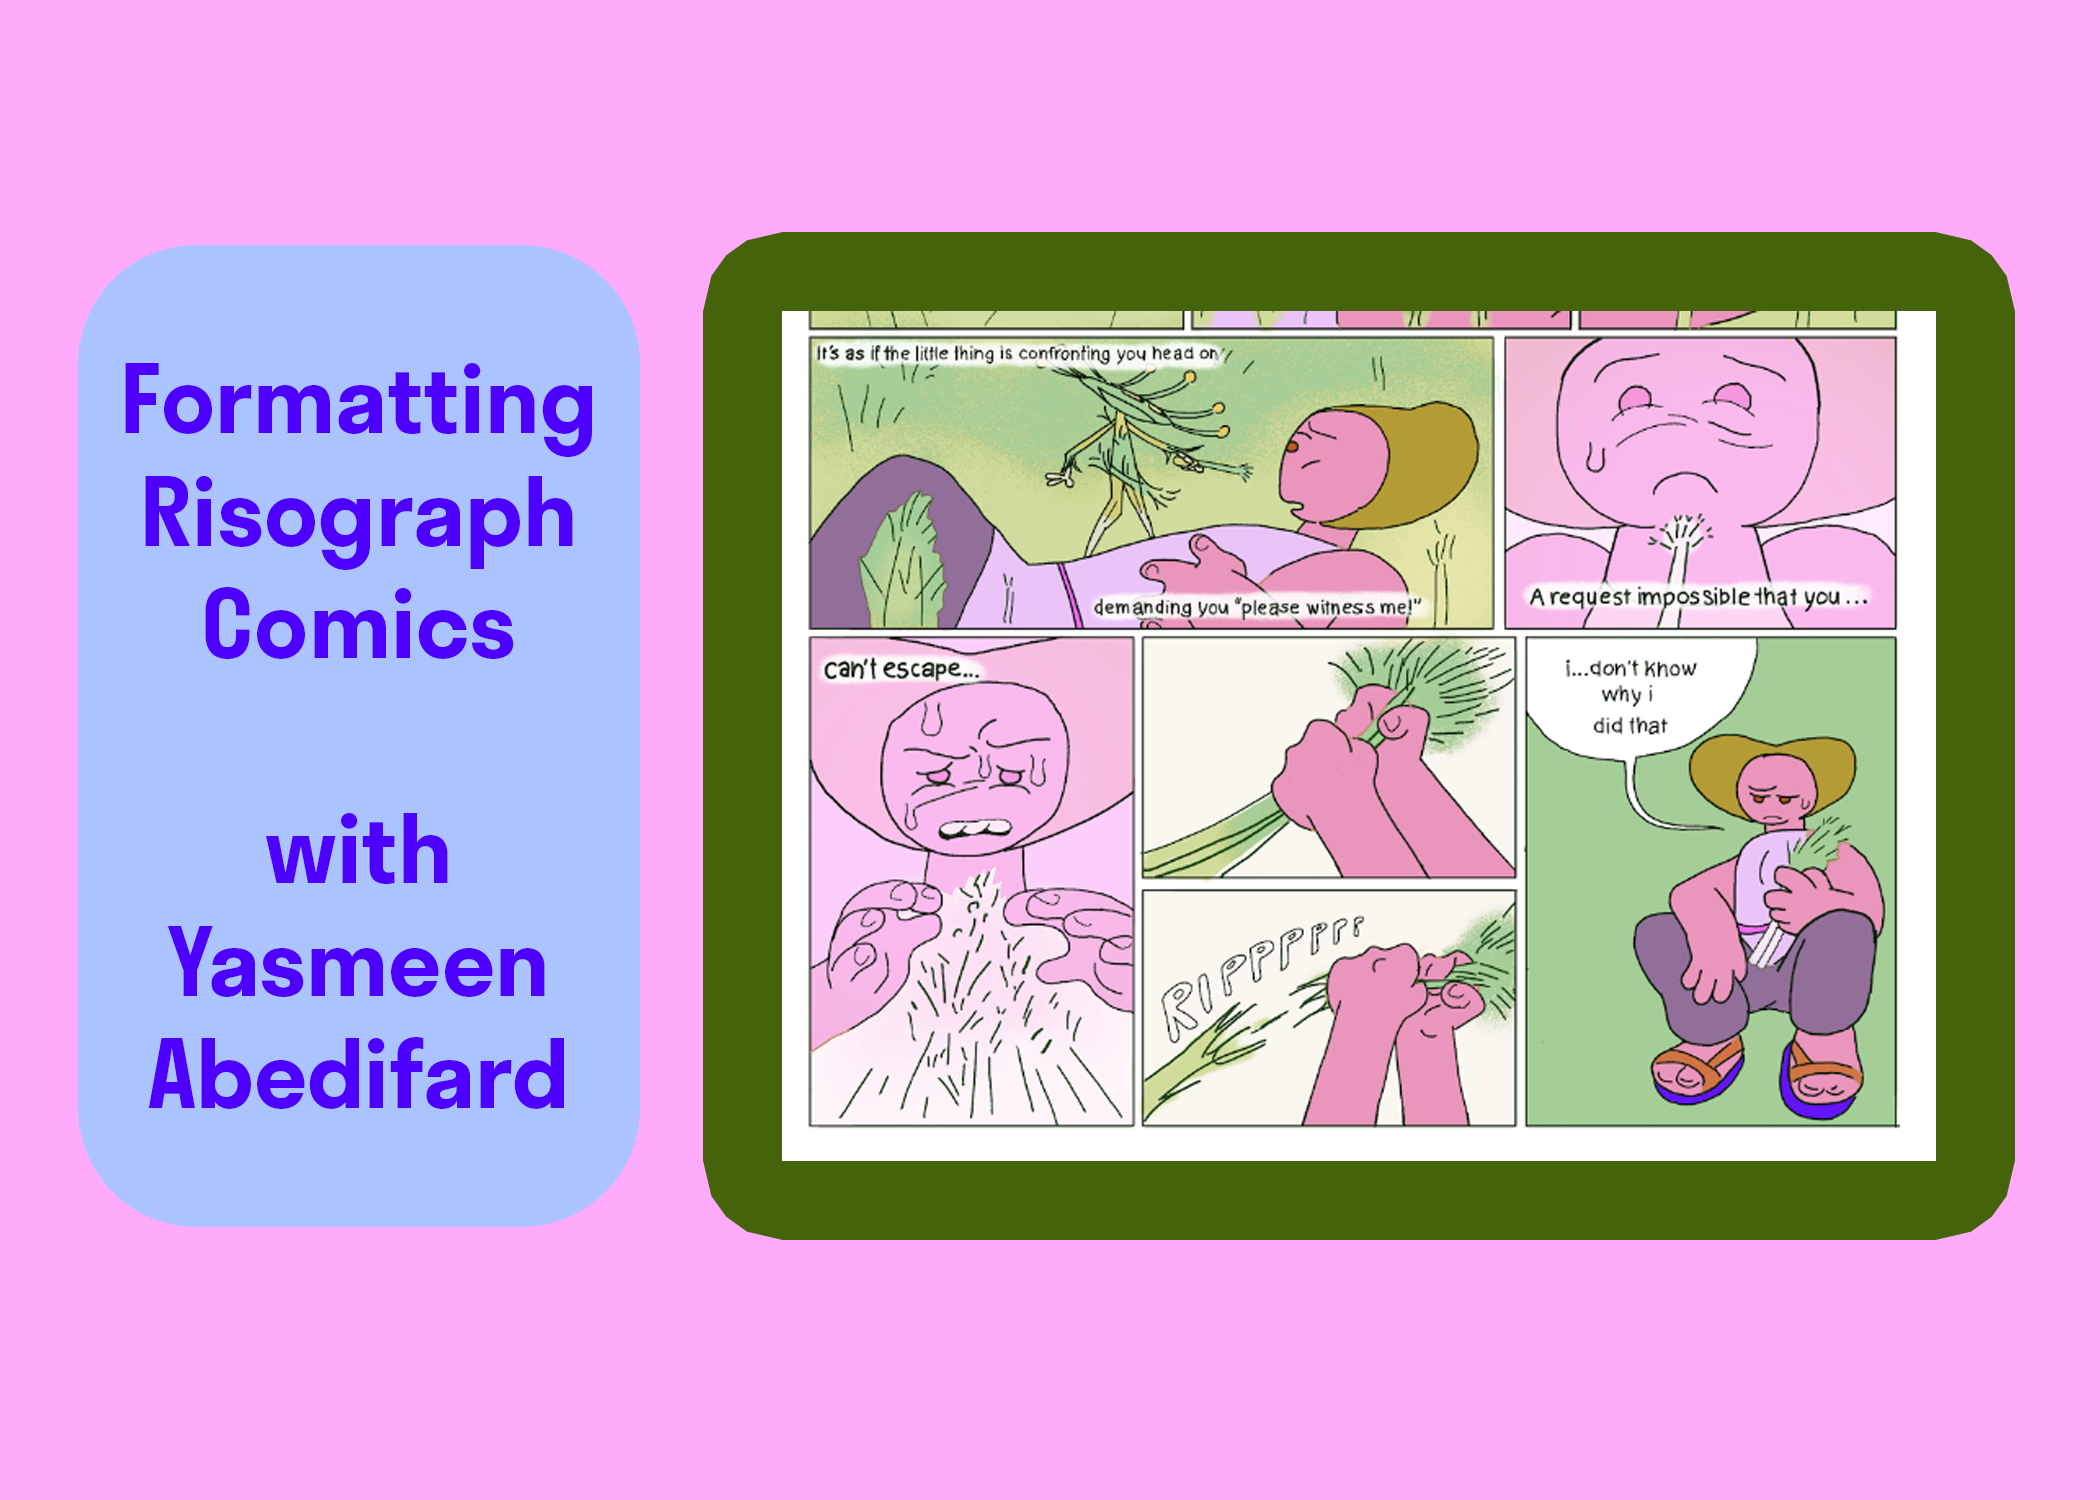 You are currently viewing Formatting Risograph Comics with Yasmeen Abedifard